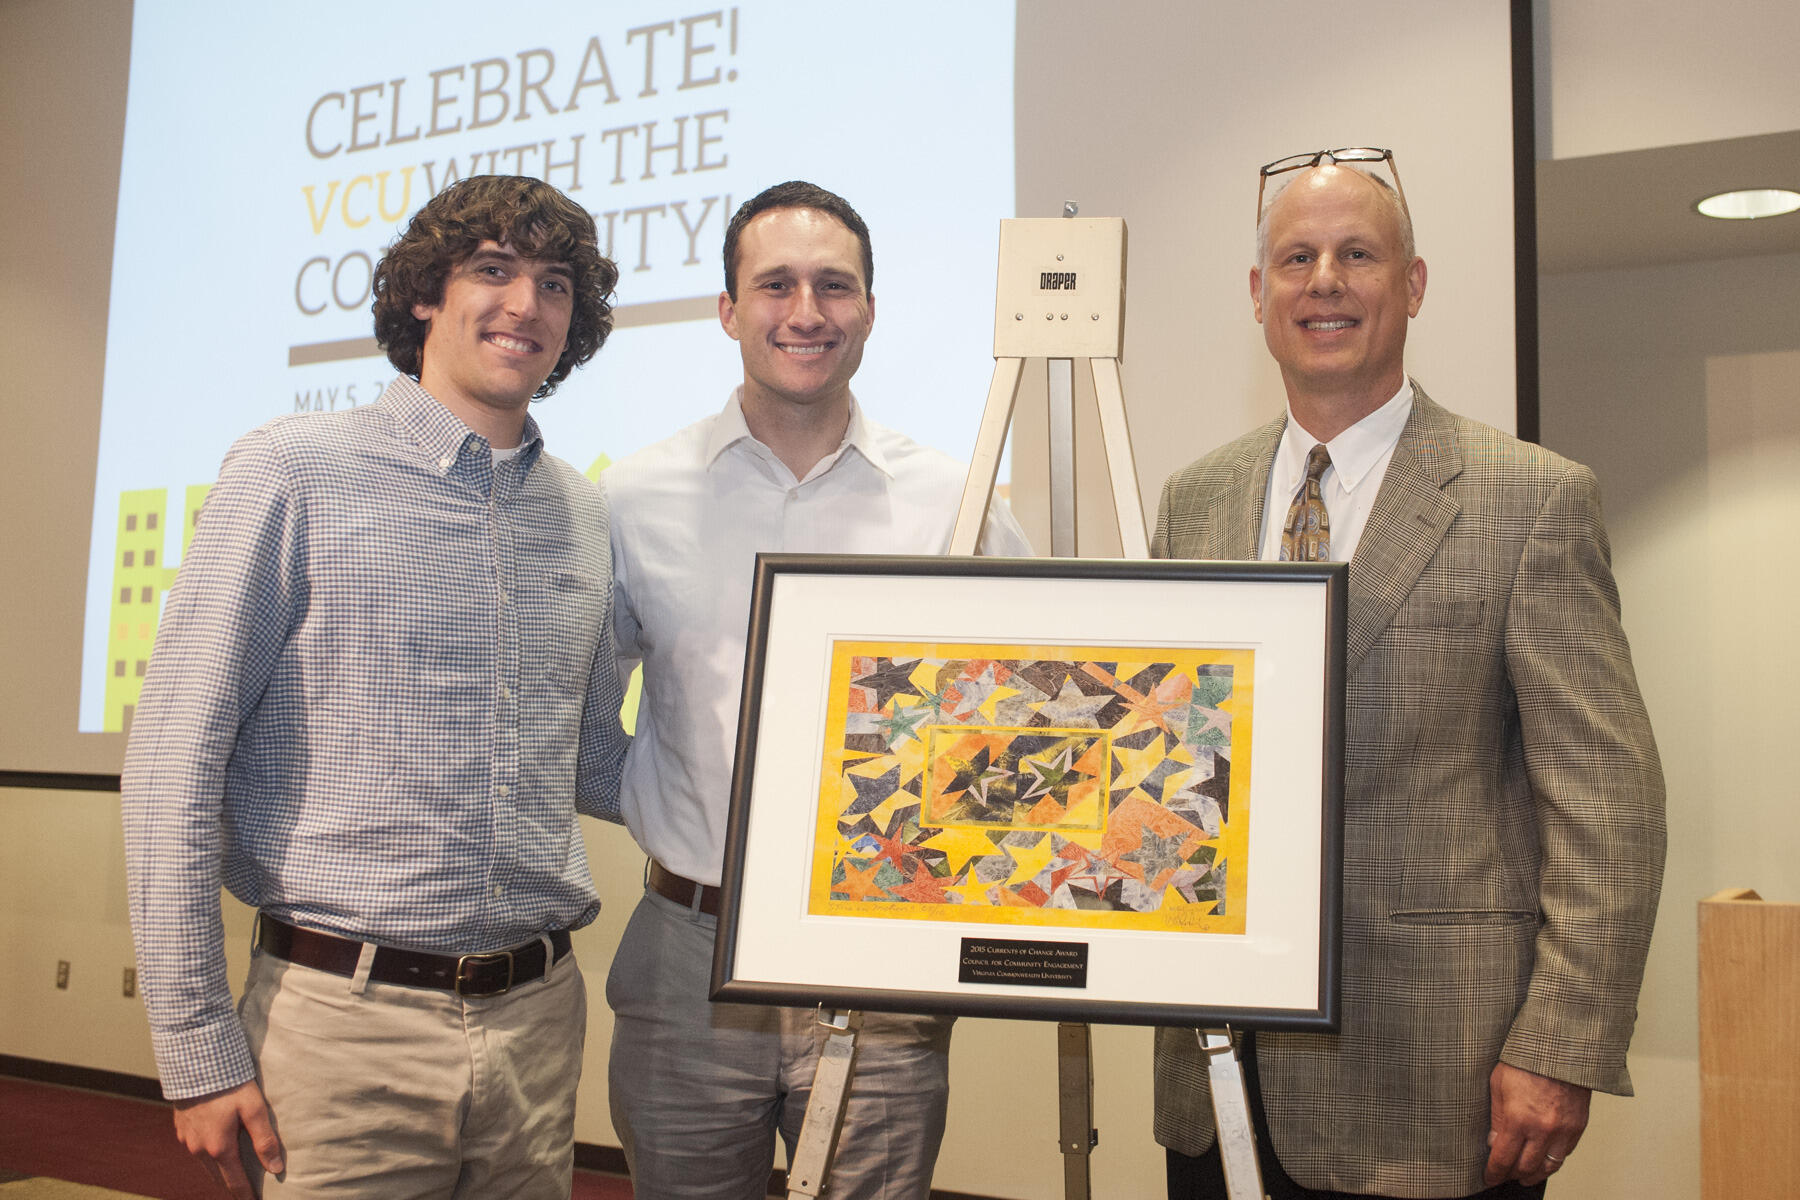 During the Community Engagement Awards ceremony earlier this year, graduate student Zach Radcliff; Paul Perrin, Ph.D., assistant professor of psychology; and Bruce Rybarczyk, Ph.D., professor of psychology, accepted the Currents of Change Award on behalf of the Safety Net Primary Care Psychology Collaborative.